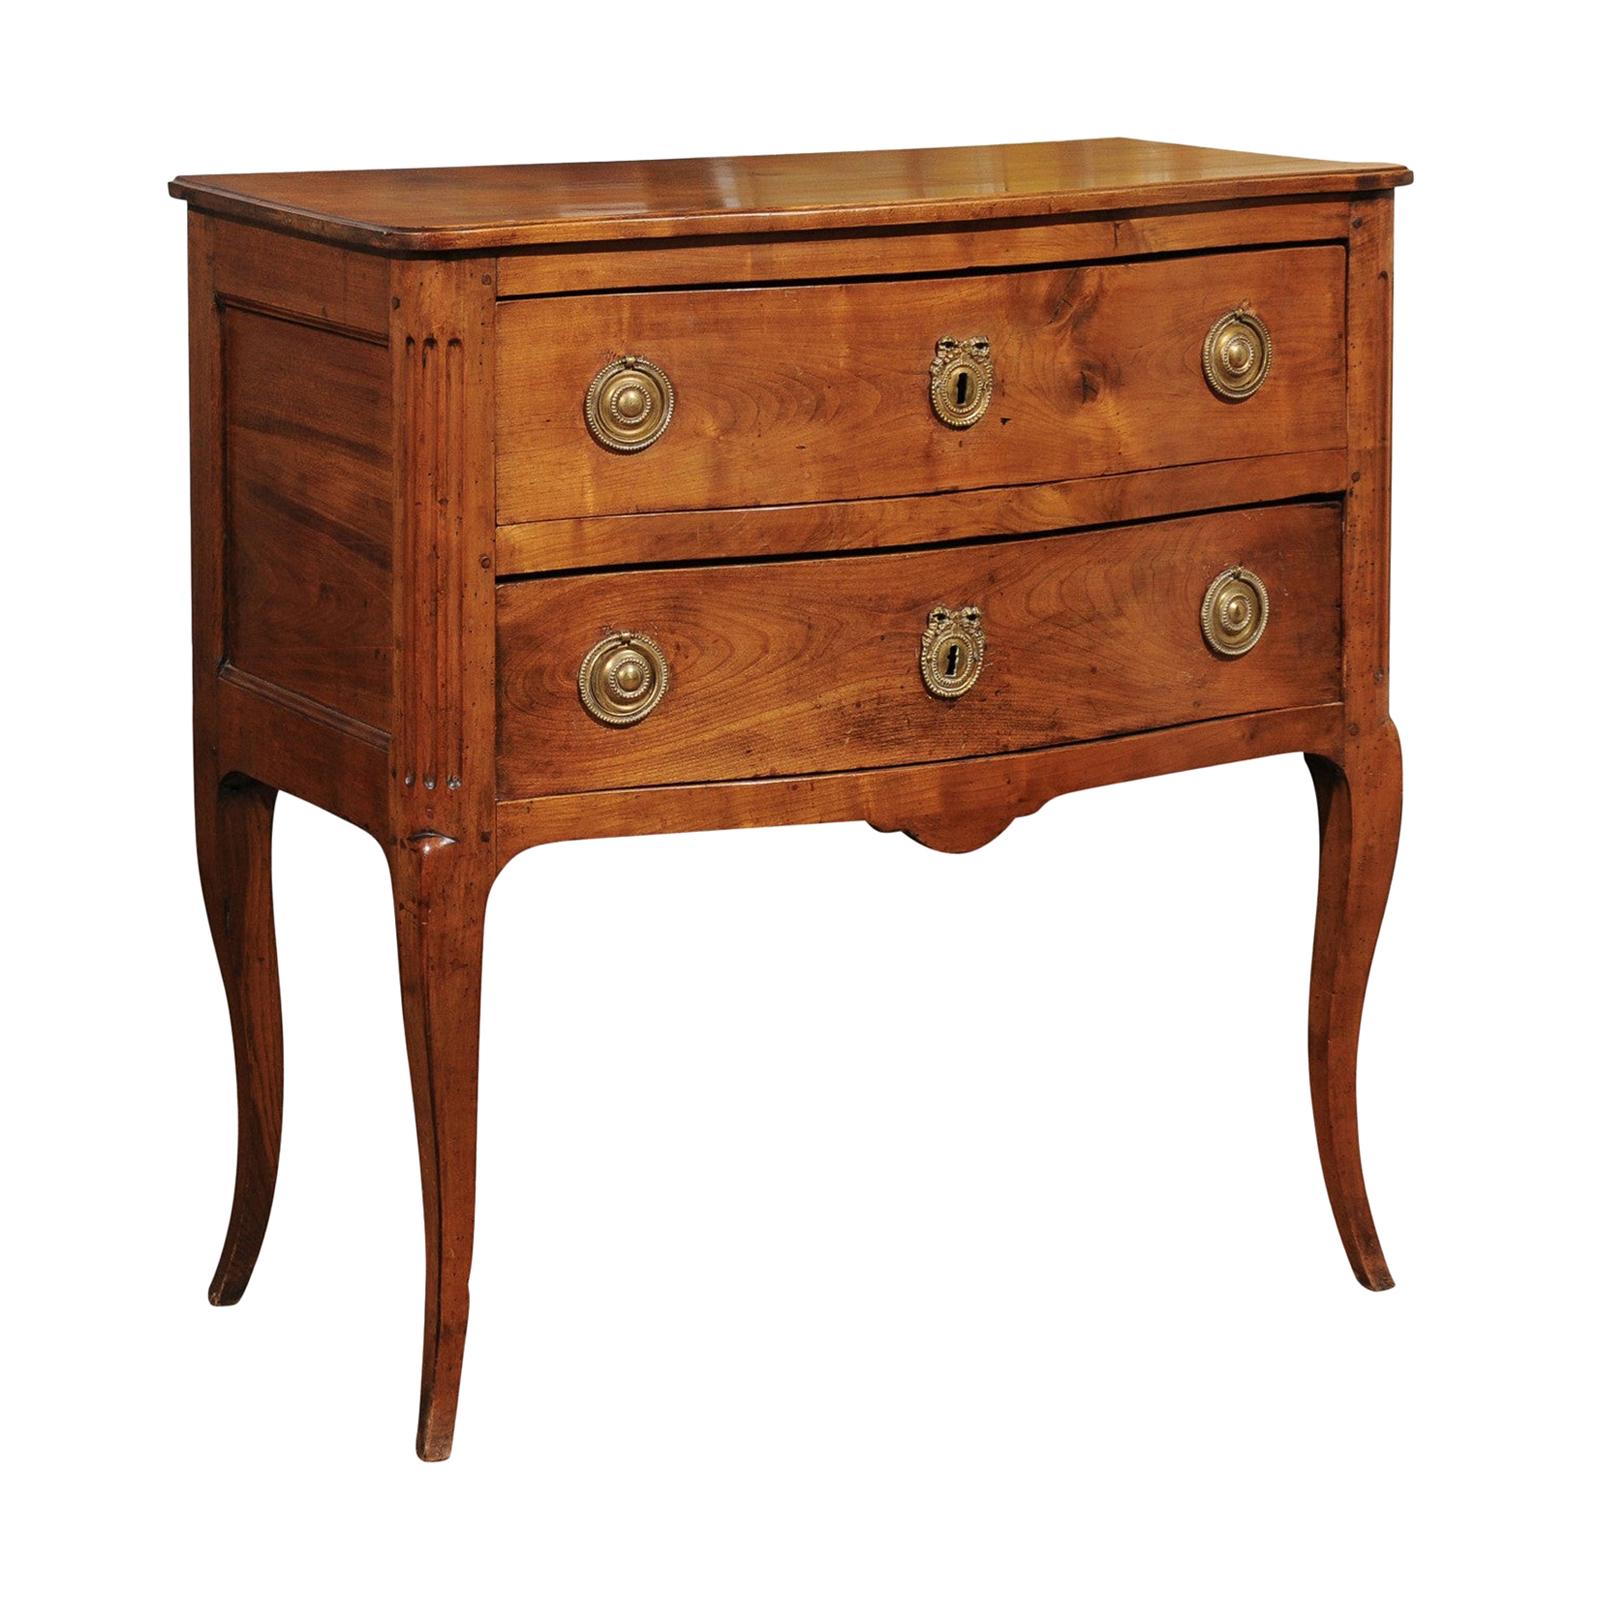 French Louis XV Style Cherry Two-Drawer Commode with Cabriole Legs, circa 1830